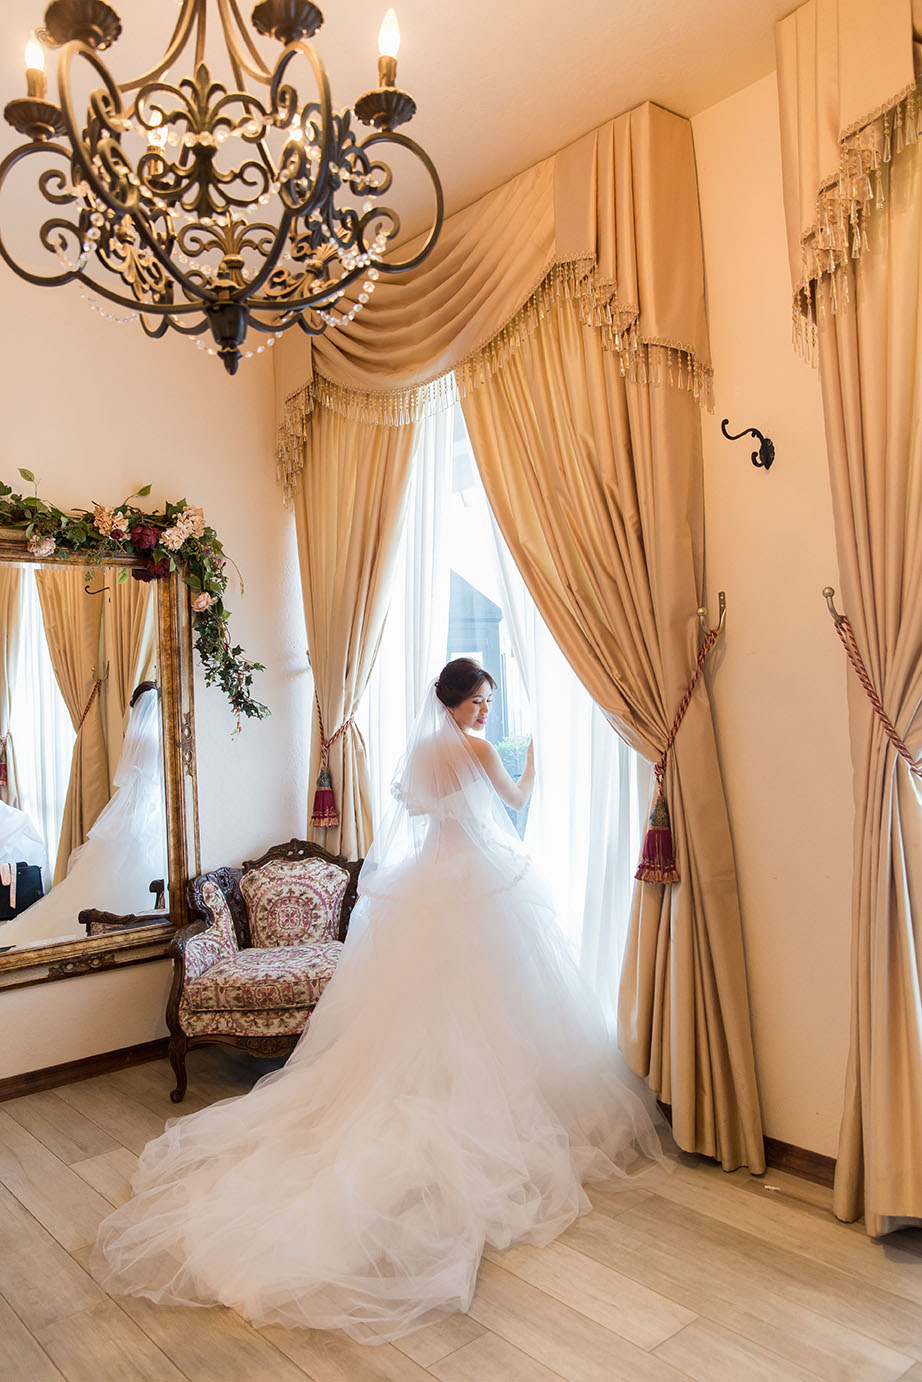 Villa Tuscana Reception Hall in mesa showing a beautiful bride in the bridal suite